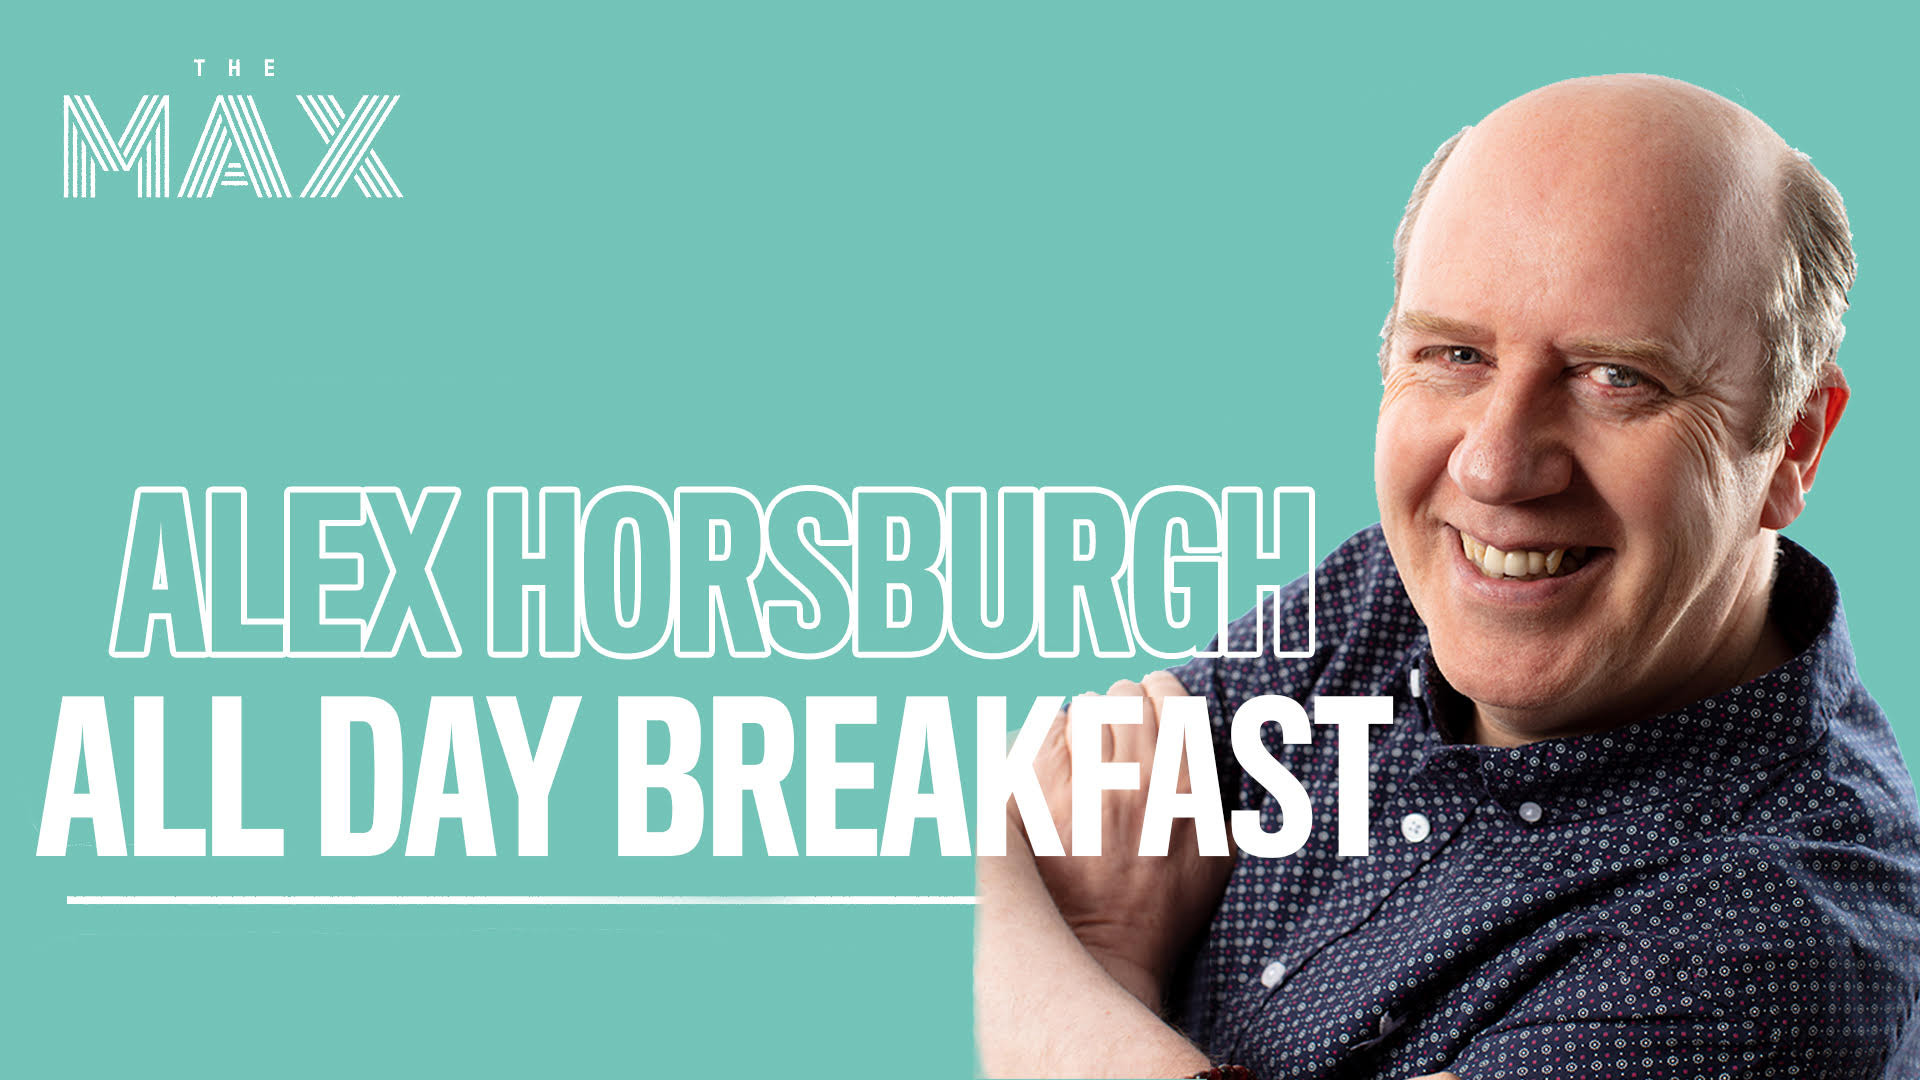 The All Day Breakfast - 5th of August 2021